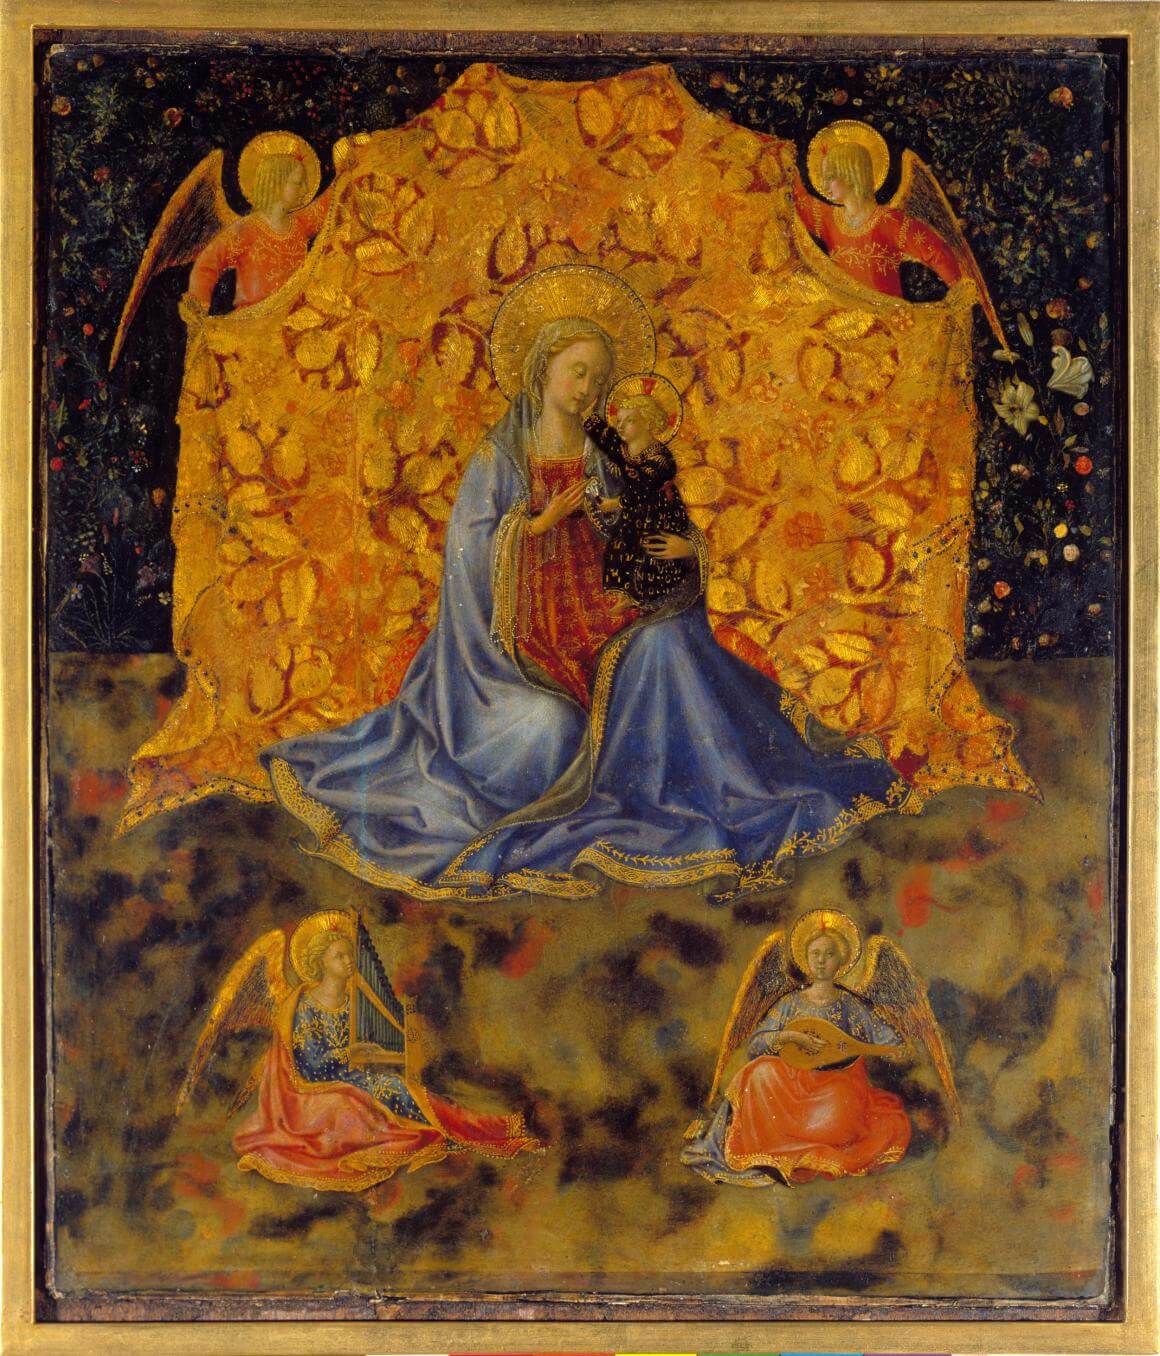 Benozzo Gozzoli, The Madonna with Child and Angels,